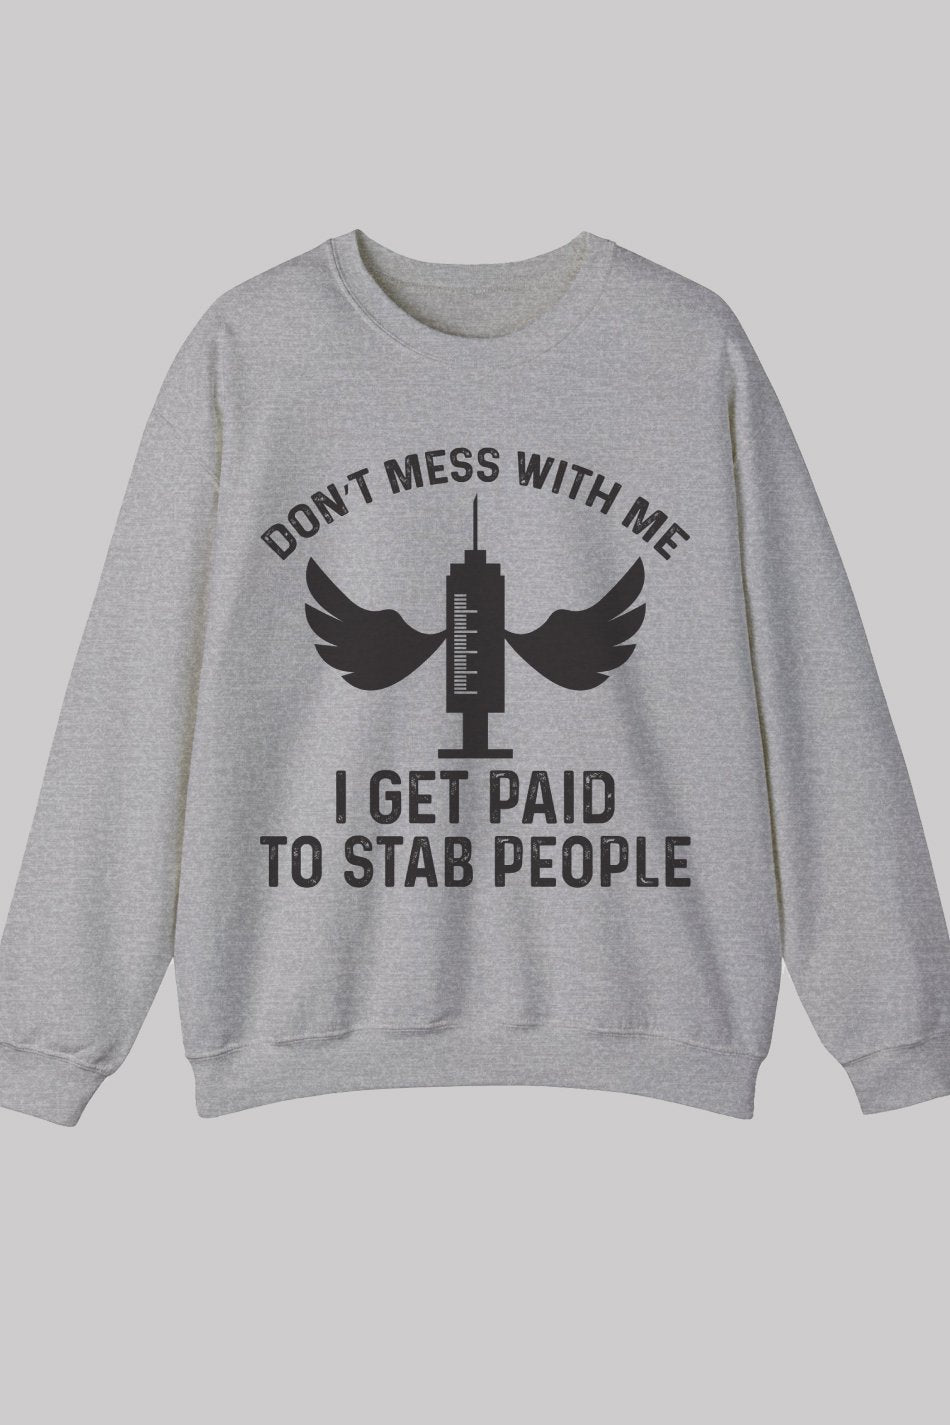 Don't Mess With Me I Get Paid To Stab People Funny Nurse Sweatshirt